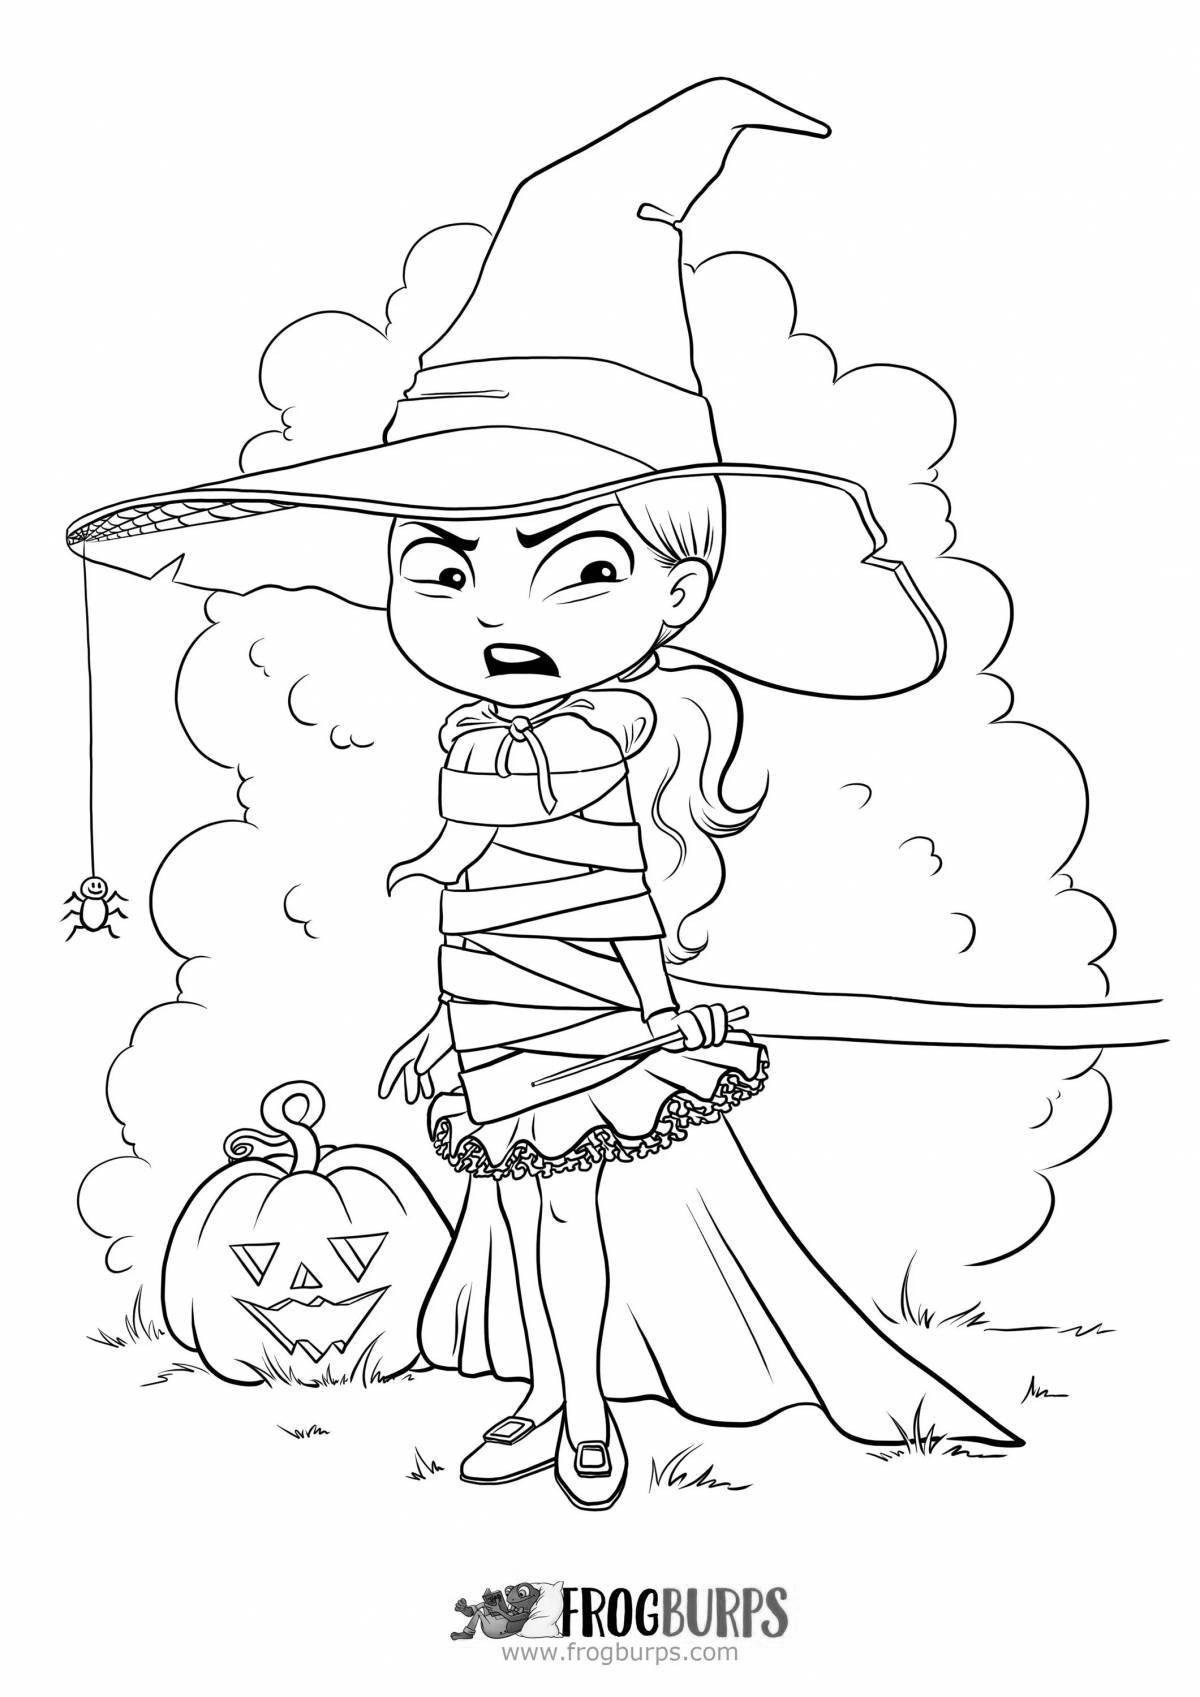 Chilling halloween coloring book for girls